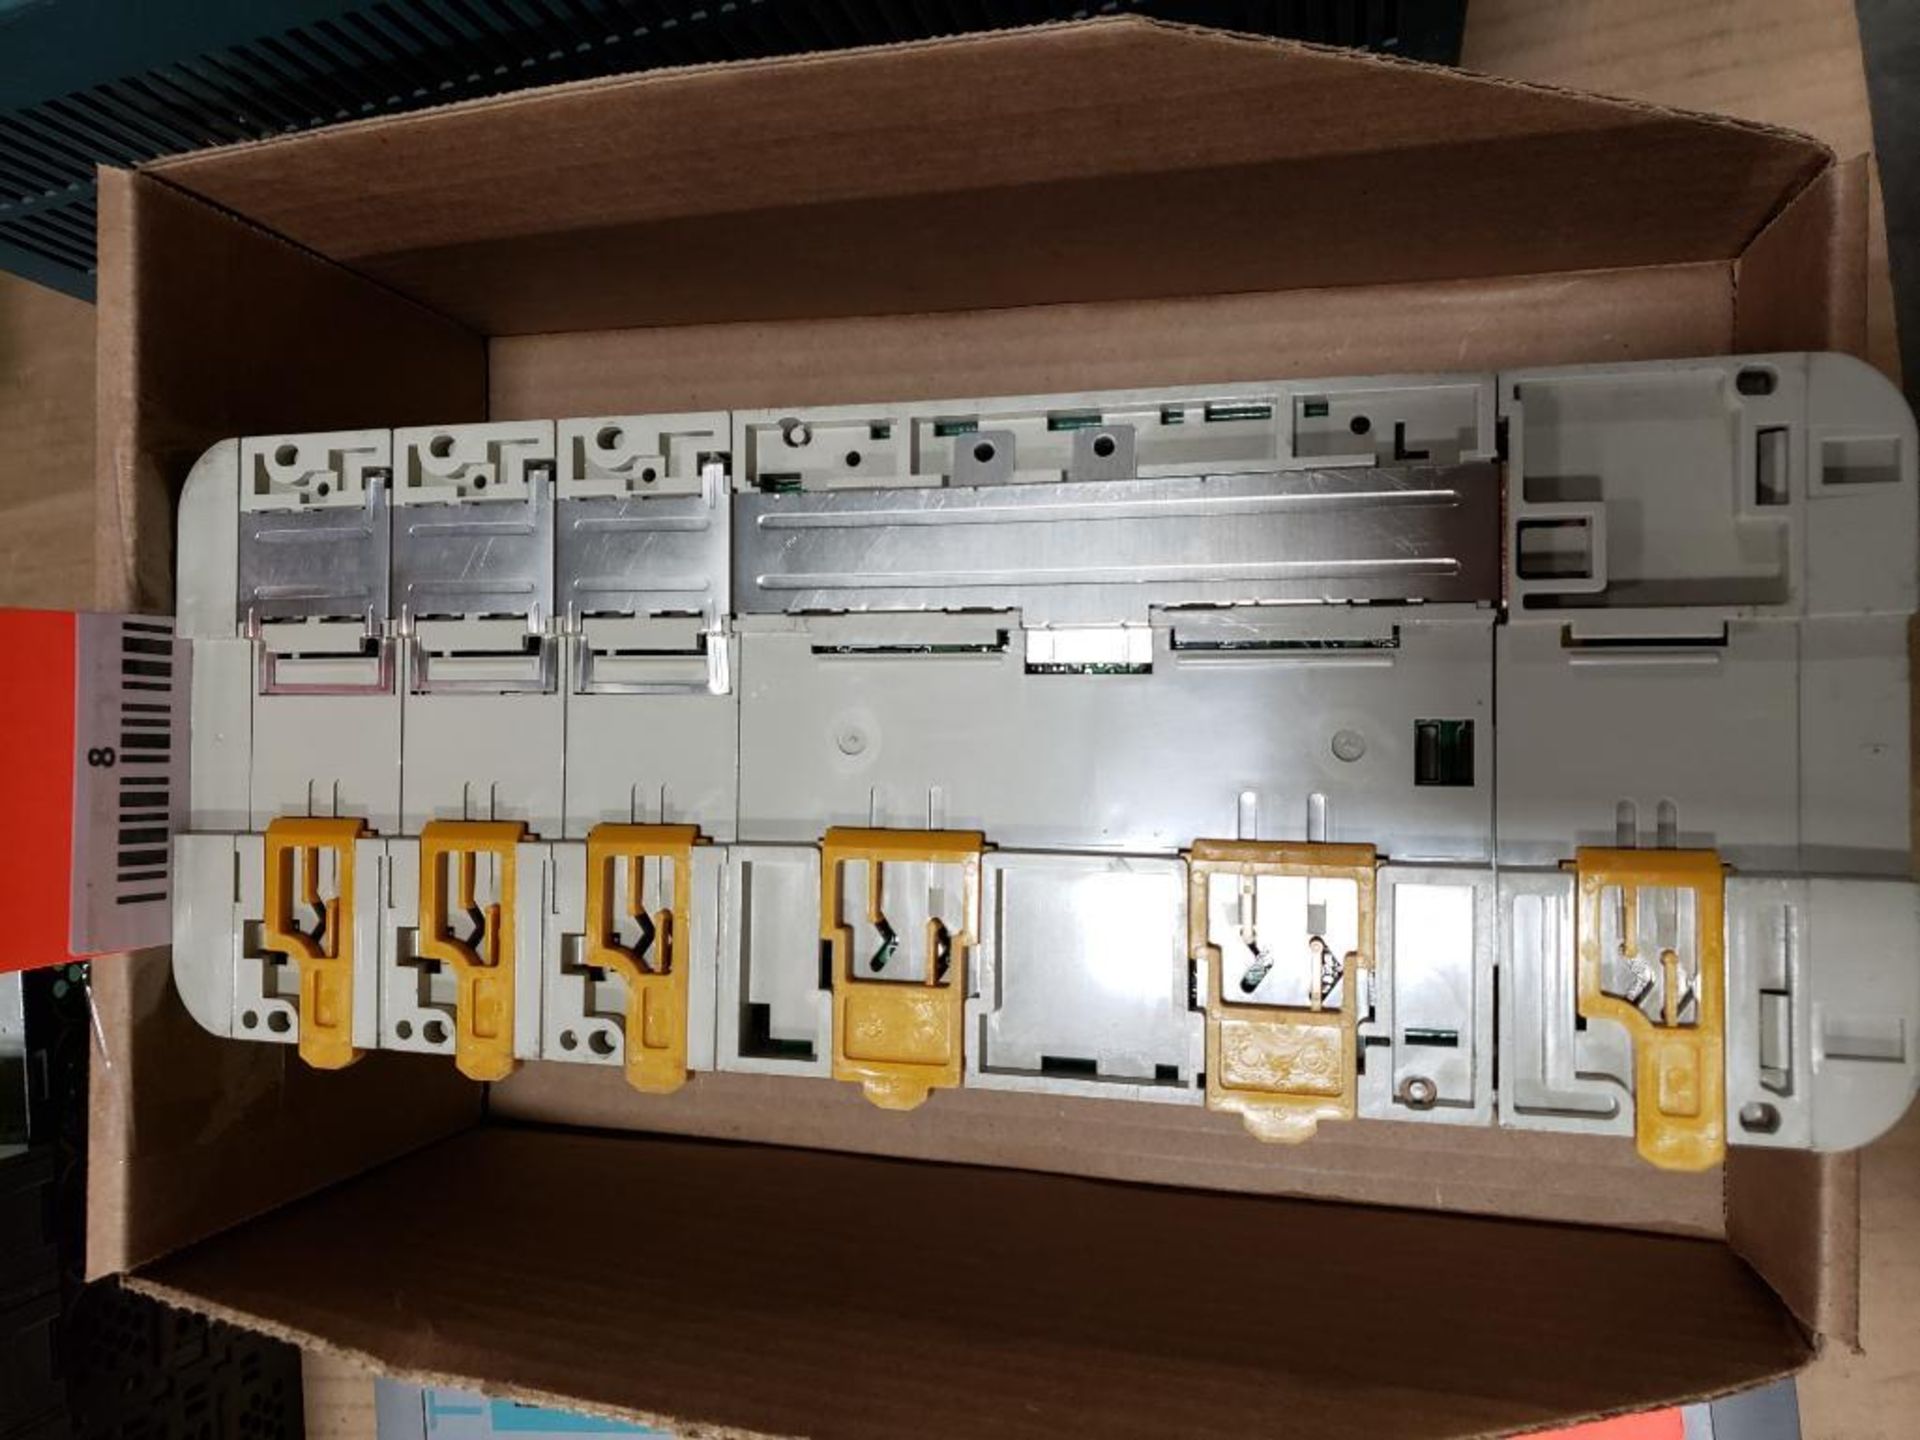 Omron SYSMAC CQM1 programmable controller rack. - Image 6 of 9